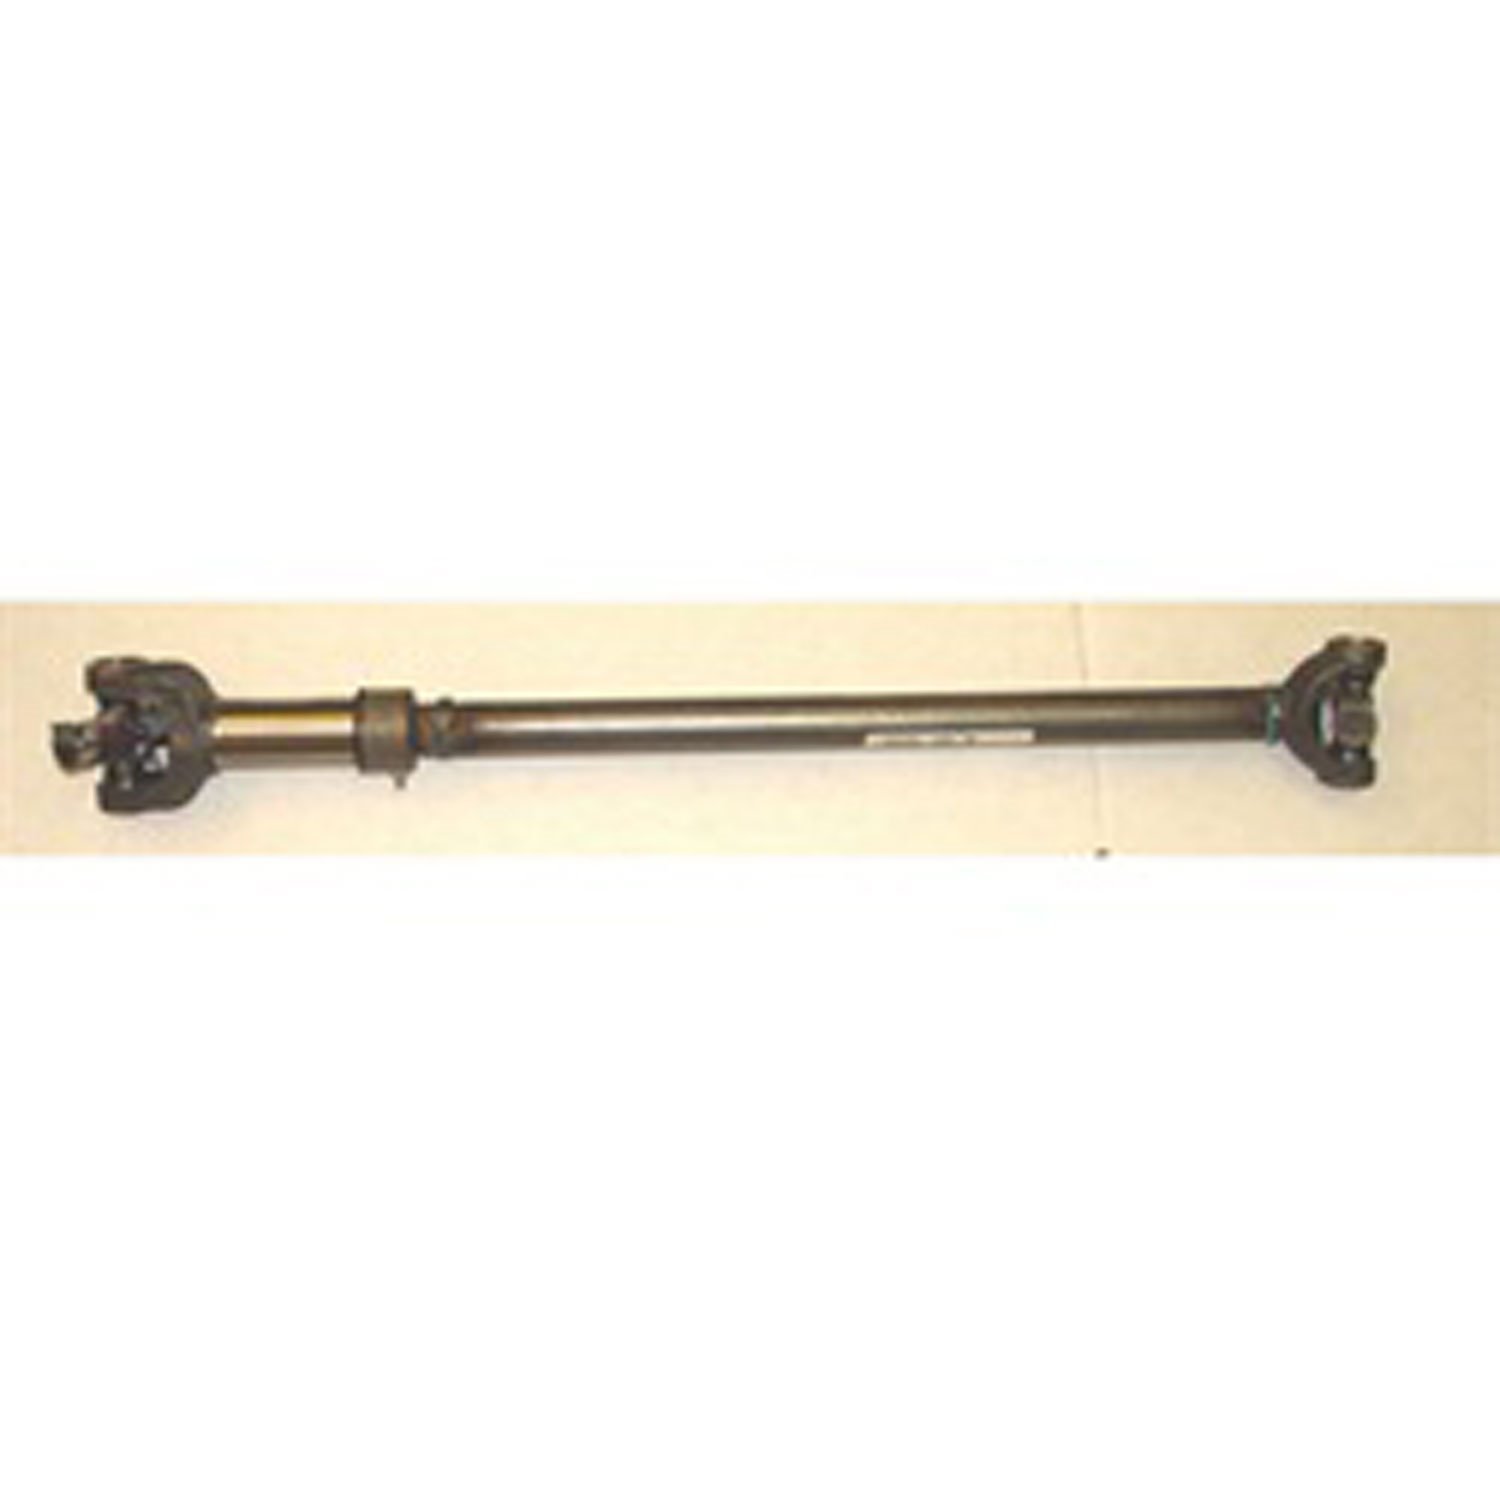 Stock replacement rear driveshaft from Omix-ADA, Fits 76-79 Jeep CJ5 with 6 or 8-cylinder engine